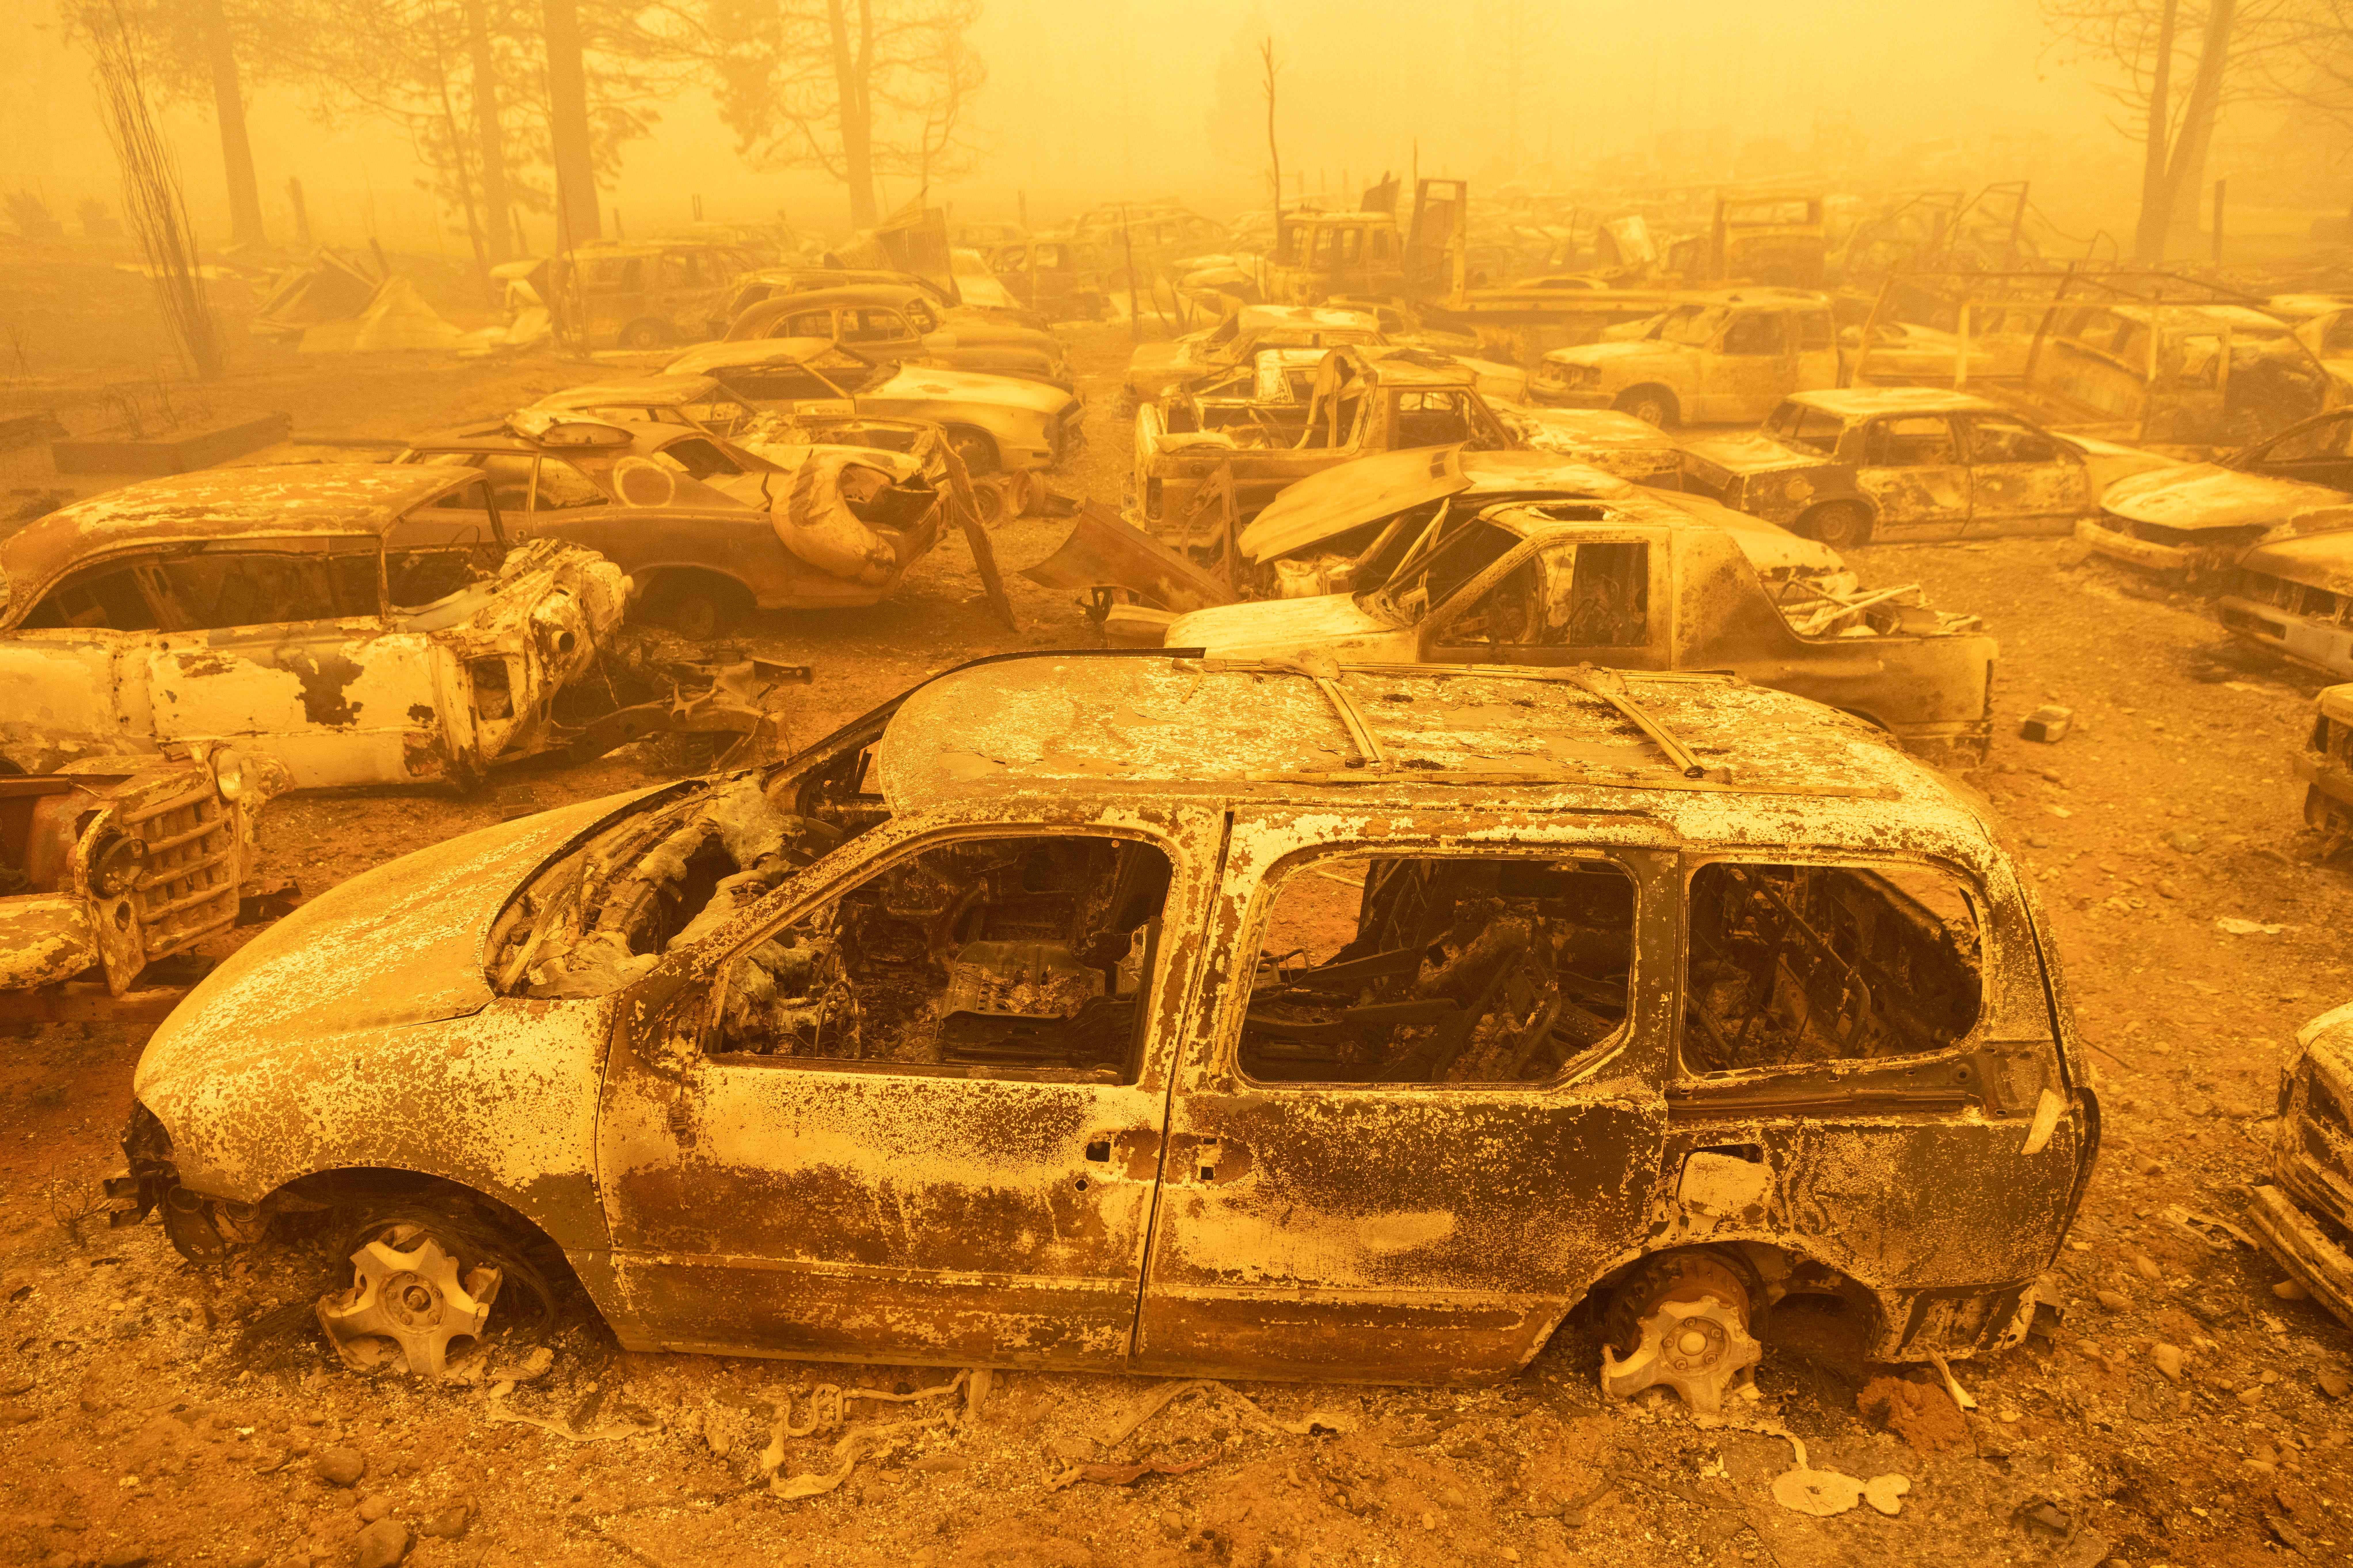 Dozens of burned vehicles rest in heavy smoke during the Dixie fire in Greenville, California on August 6, 2021. 